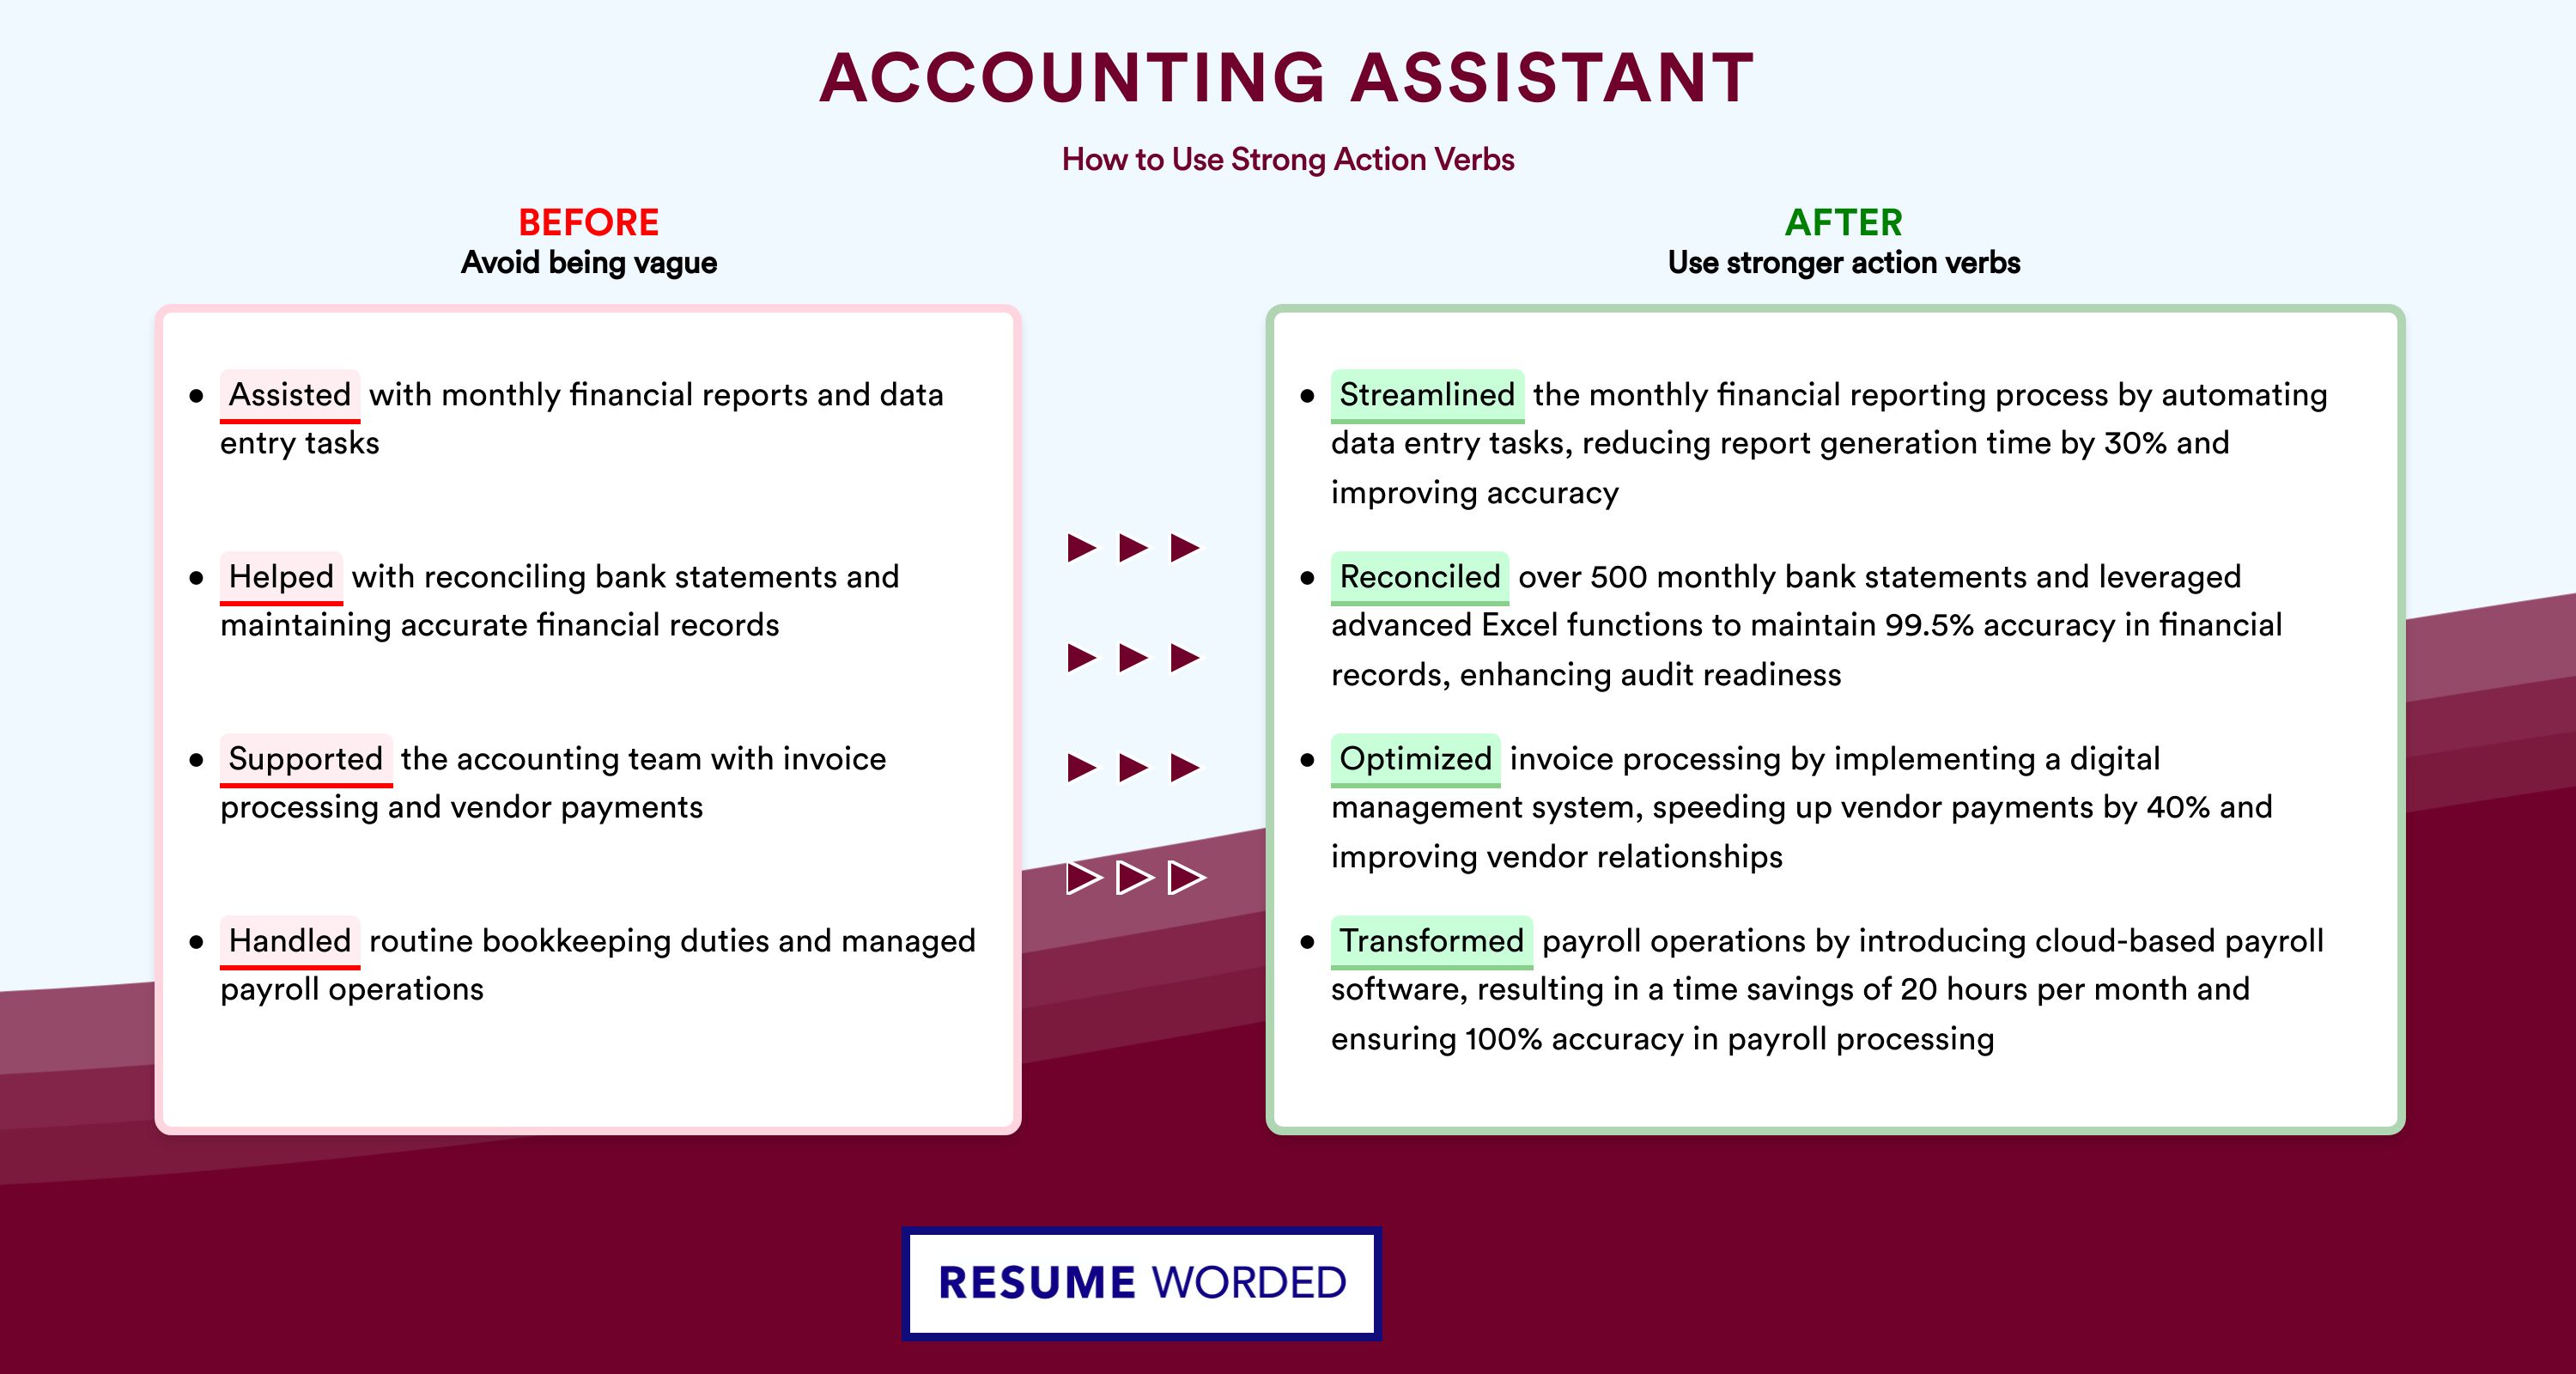 Action Verbs for Accounting Assistant